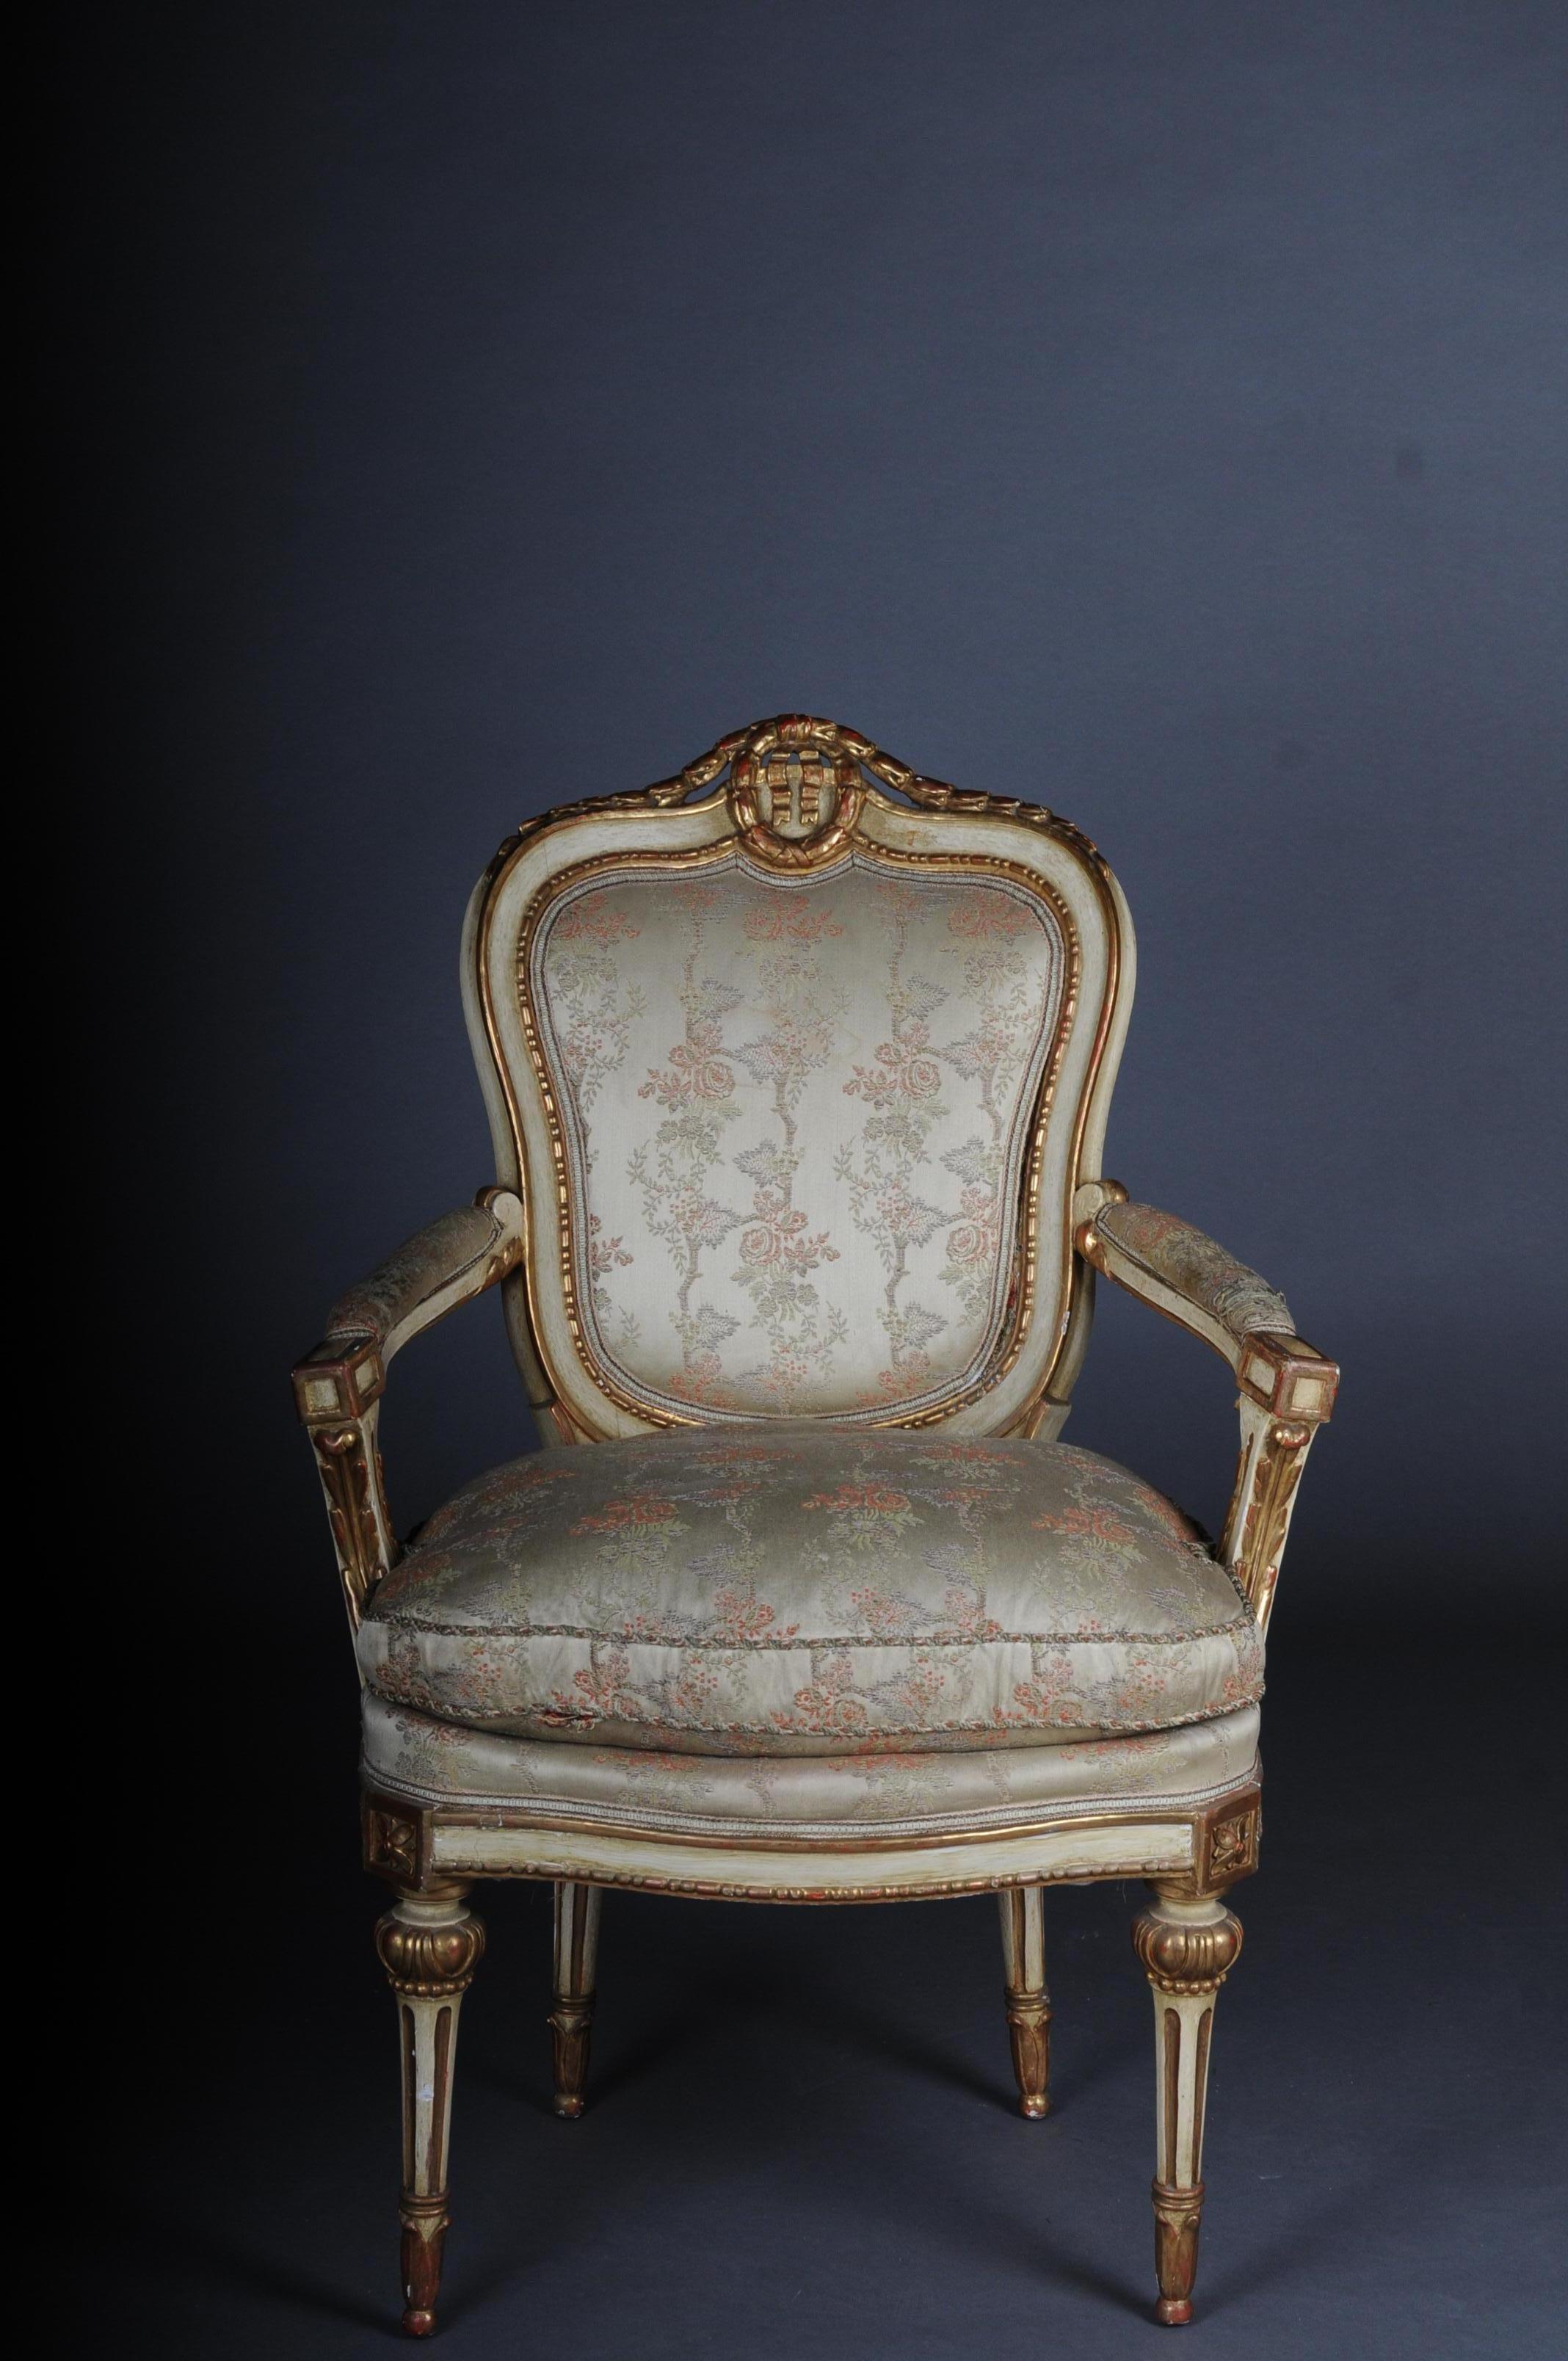 French set of 18 salon chairs / armchairs, Napoleon III

Extensive and very rare Louis XV salon seating group consisting of 8 armchairs and 10 chairs.
Solid wood, painted cream and partly gilded. Cambered and carved frame on curved feet.
The